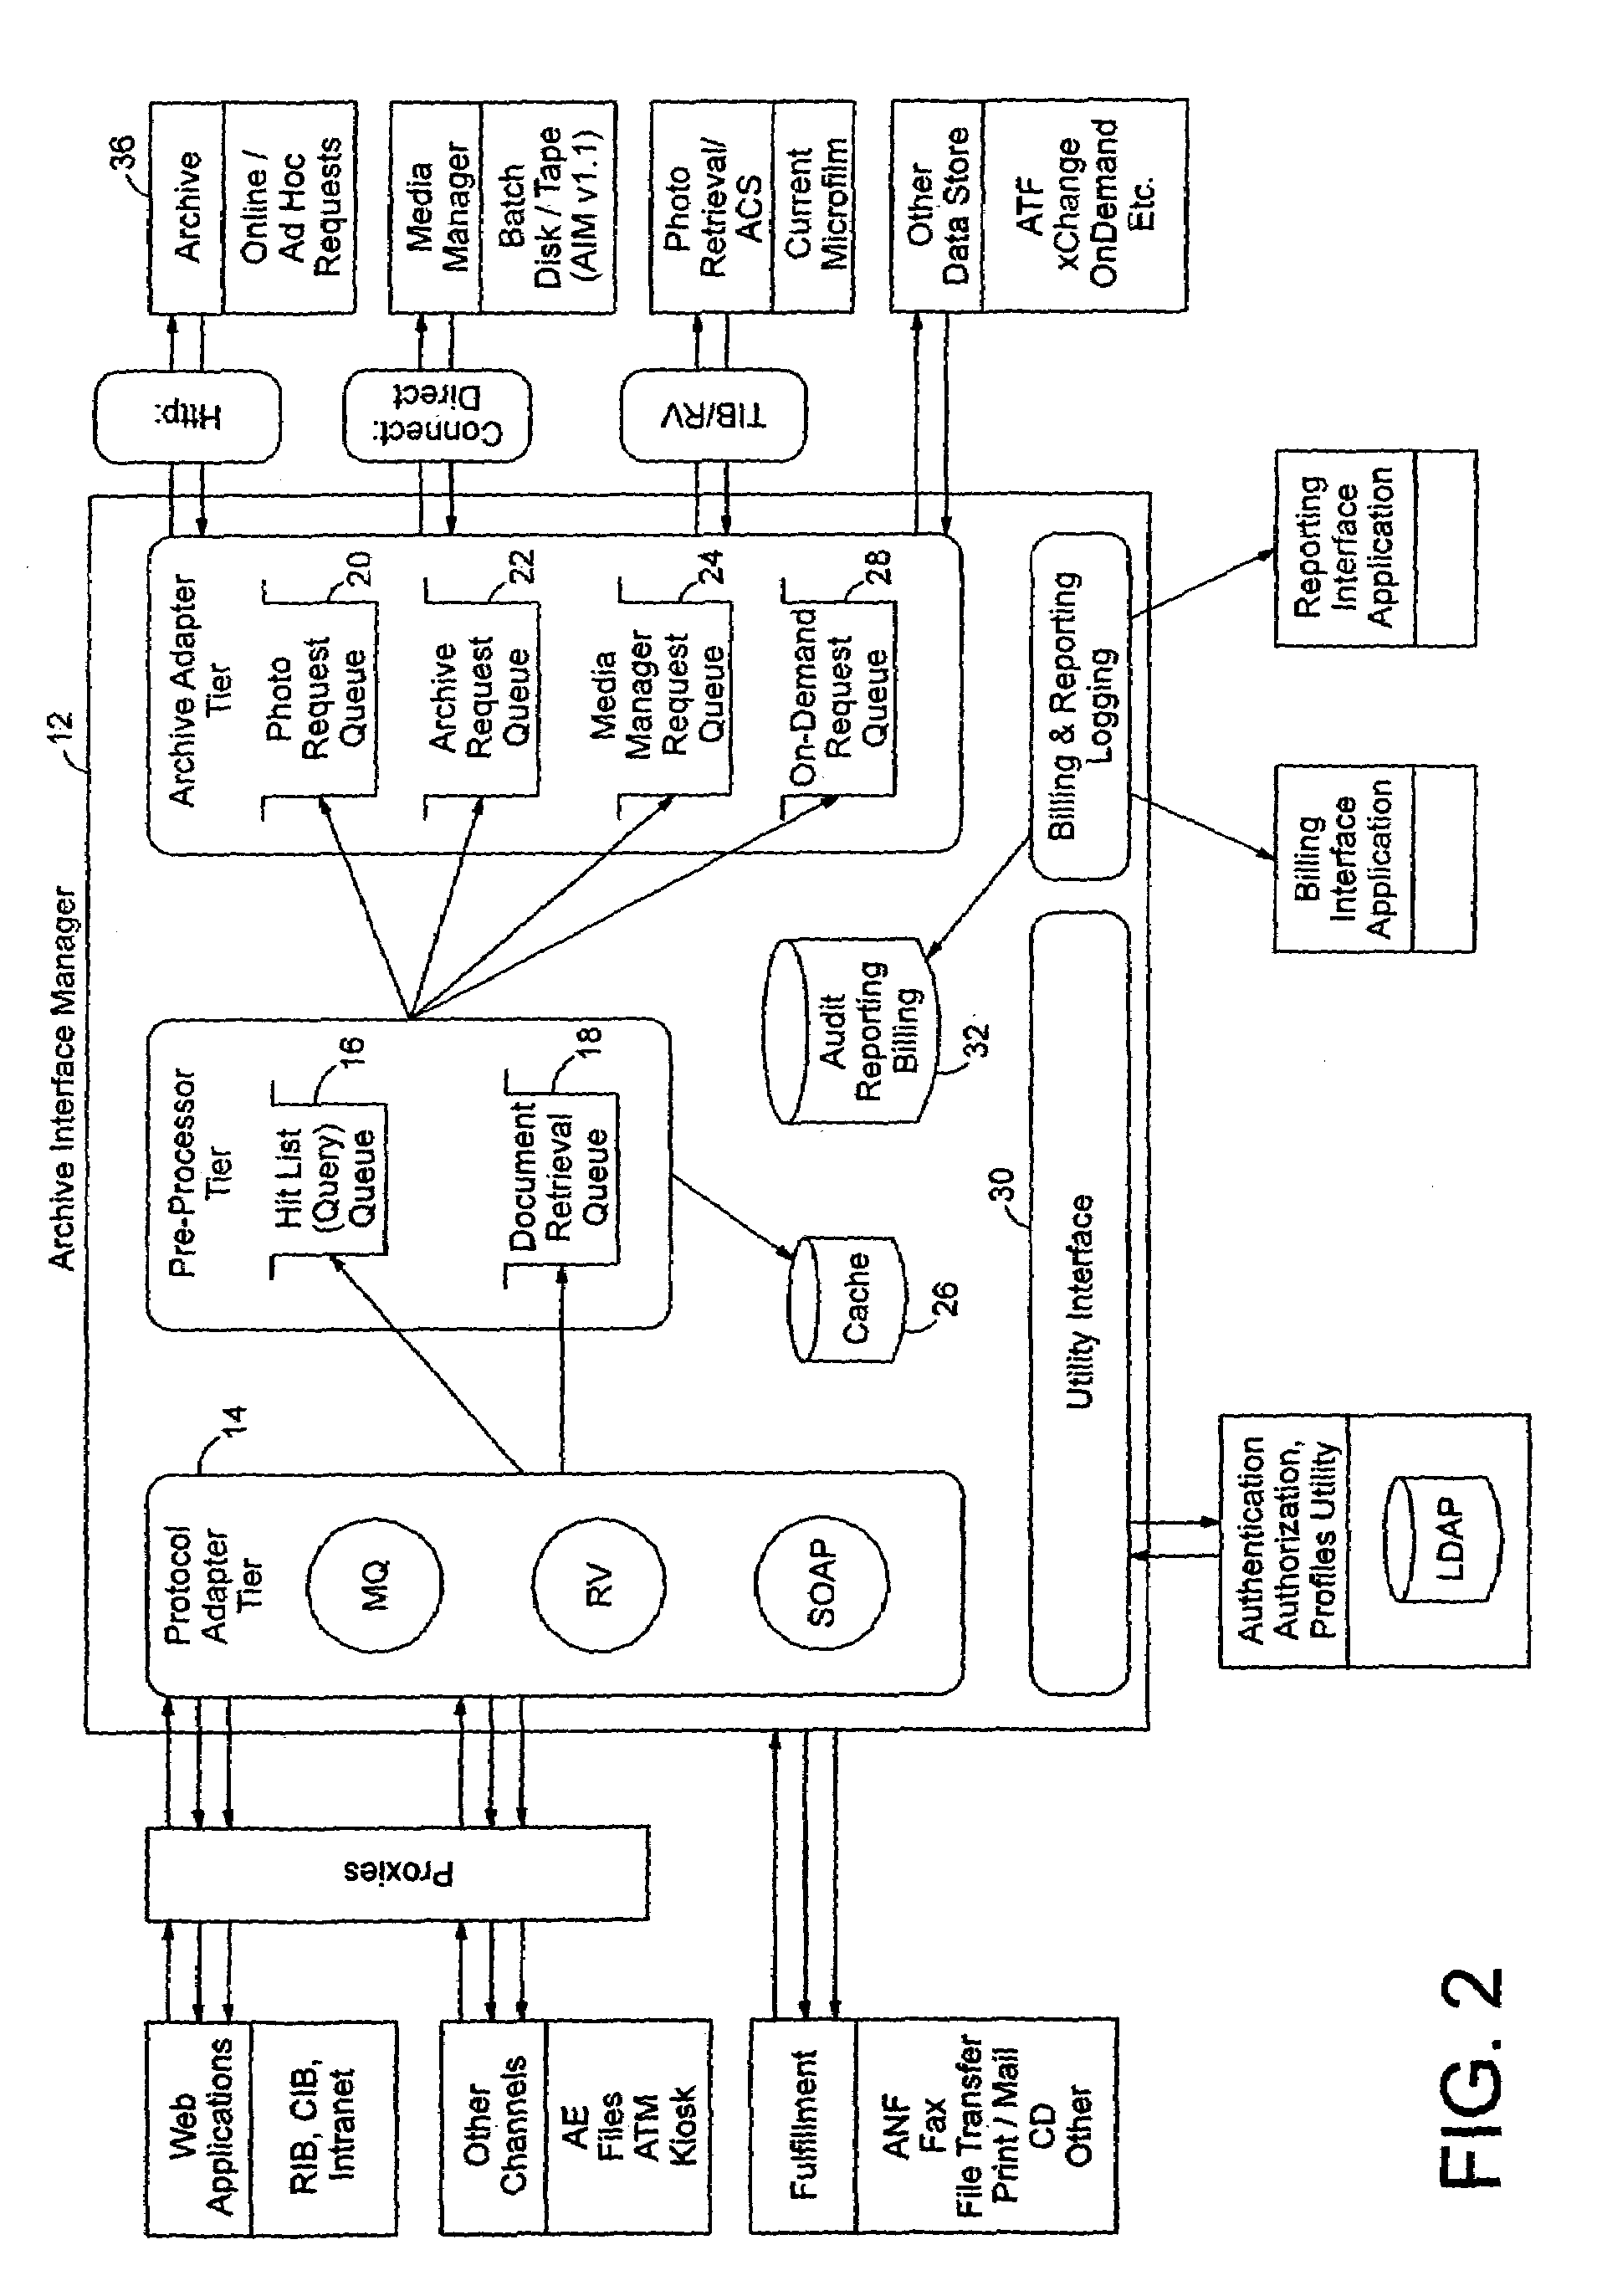 System and method for managing requests to document archives, routing requests and delivering requests to a variety of channels or delivery mechanisms